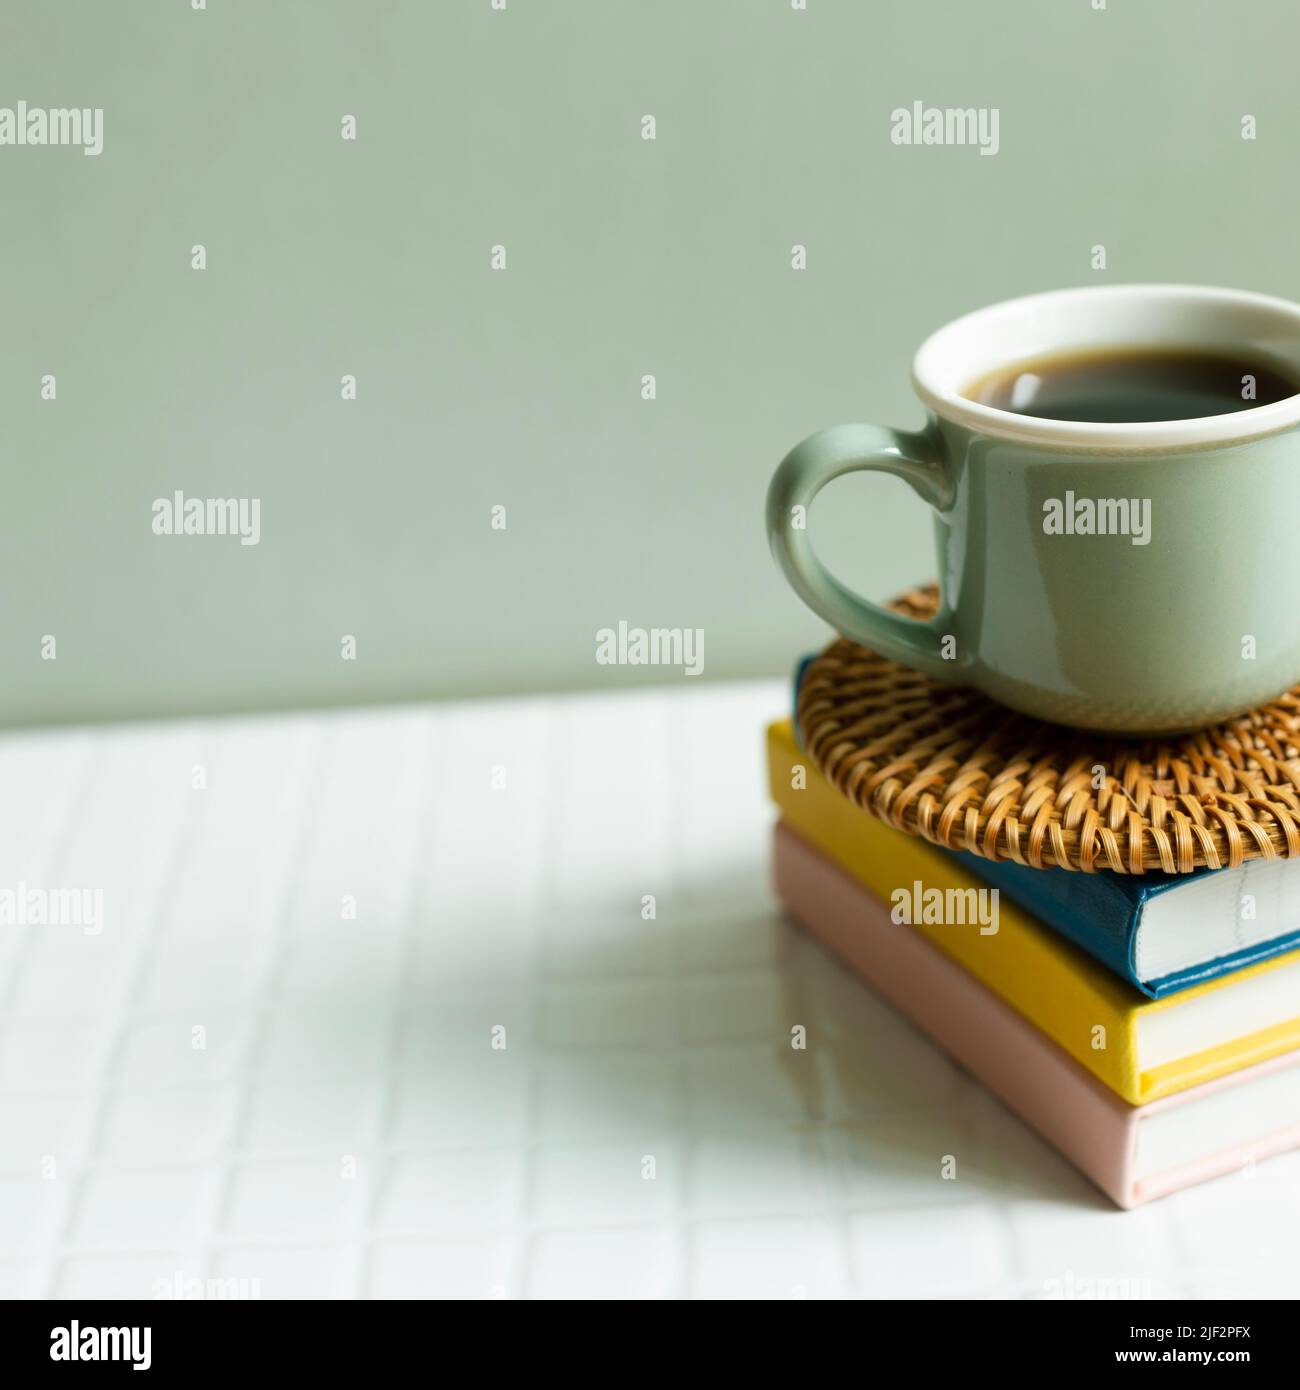 Cup of coffee and notebook on white desk. khaki green wall background Stock Photo